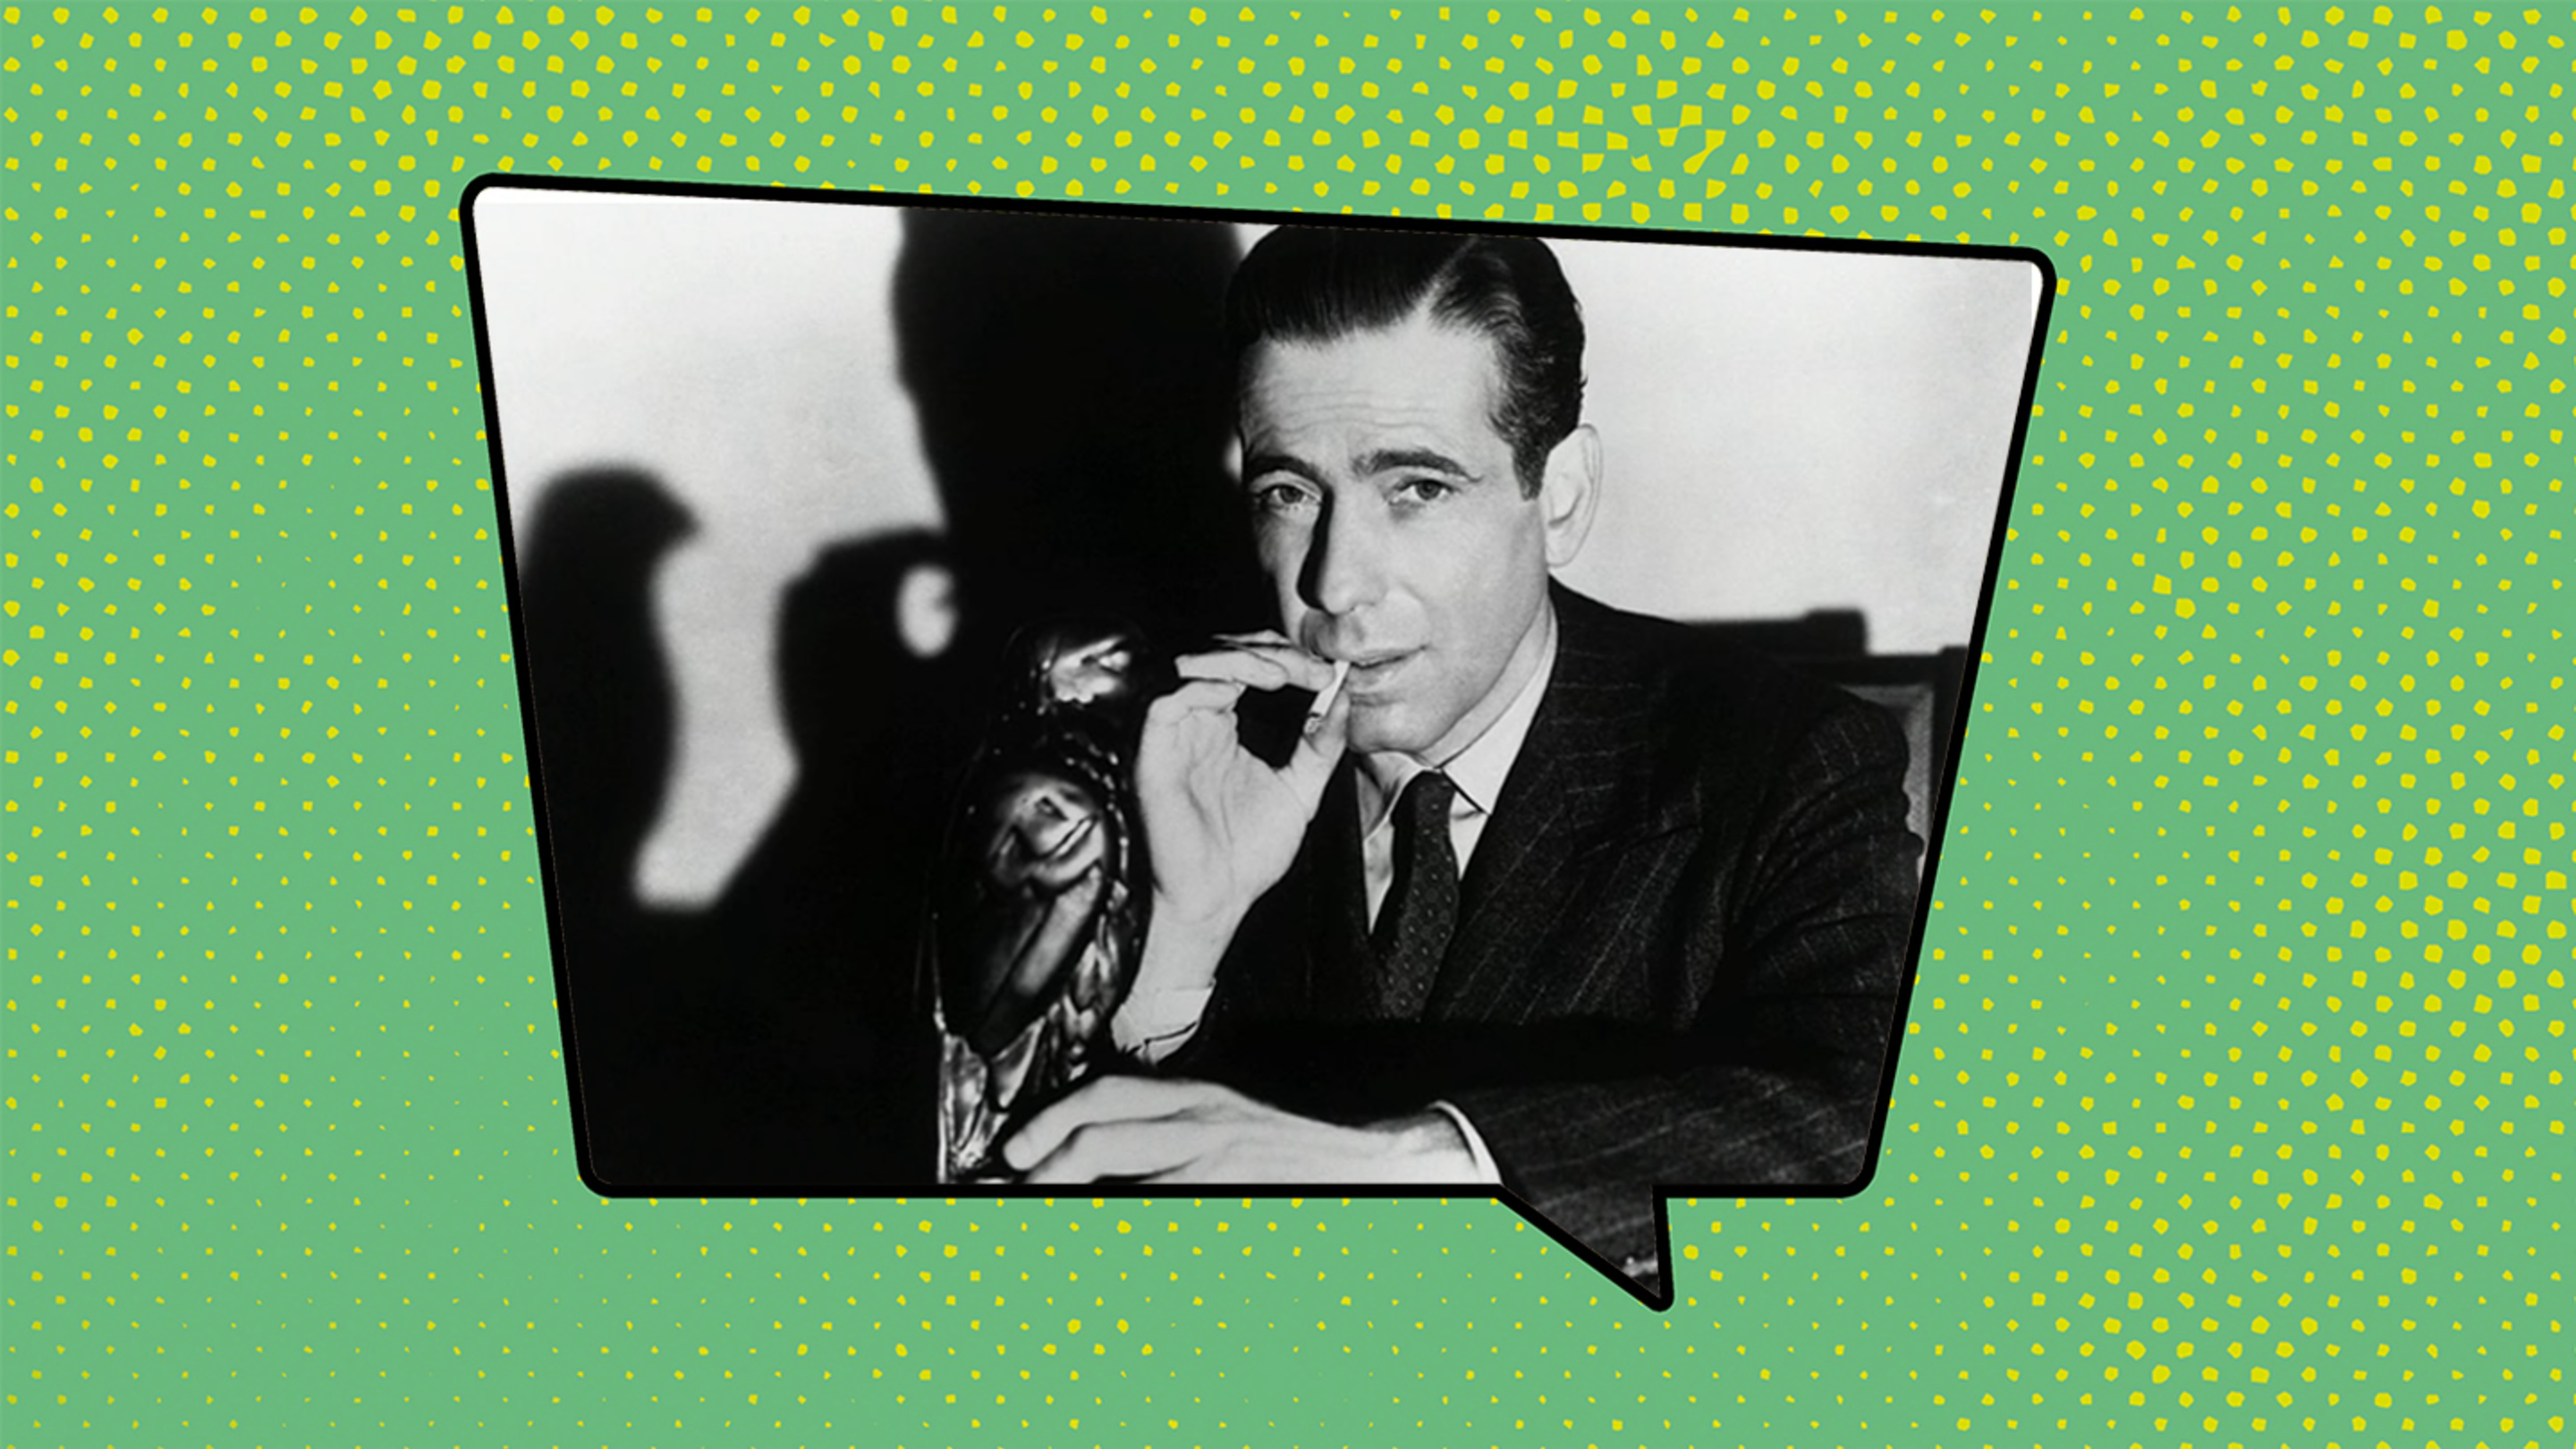 Did Humphrey Bogart Really Hog Joints? (And If Not, Why Do We Say
‘Bogart’?)